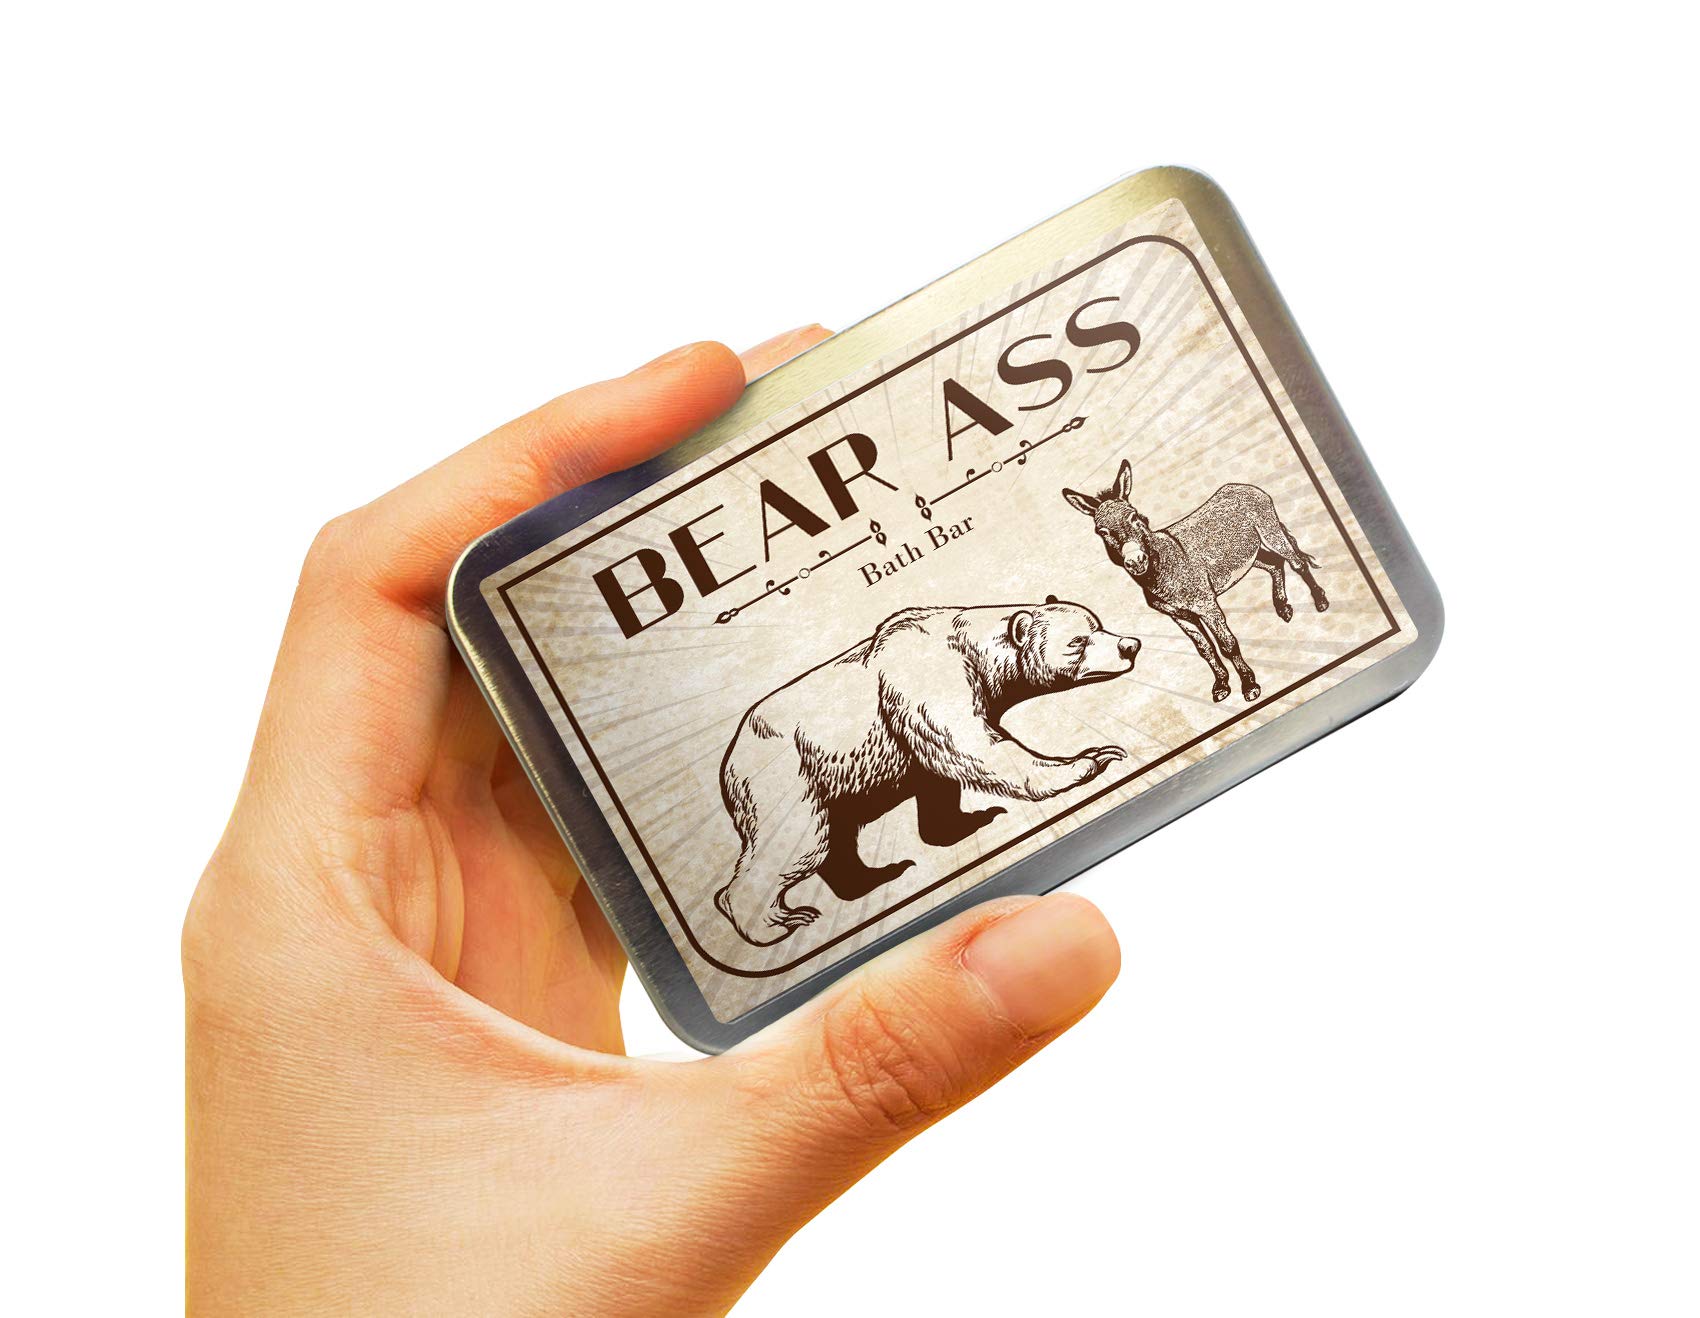 Bear Ass Bath Bar - Funny Vintage Bear and Donkey Design - Novelty Bath Soap for Men - Coffee Soap, Handcrafted, Made in the USA, Contains Real Ground Coffee